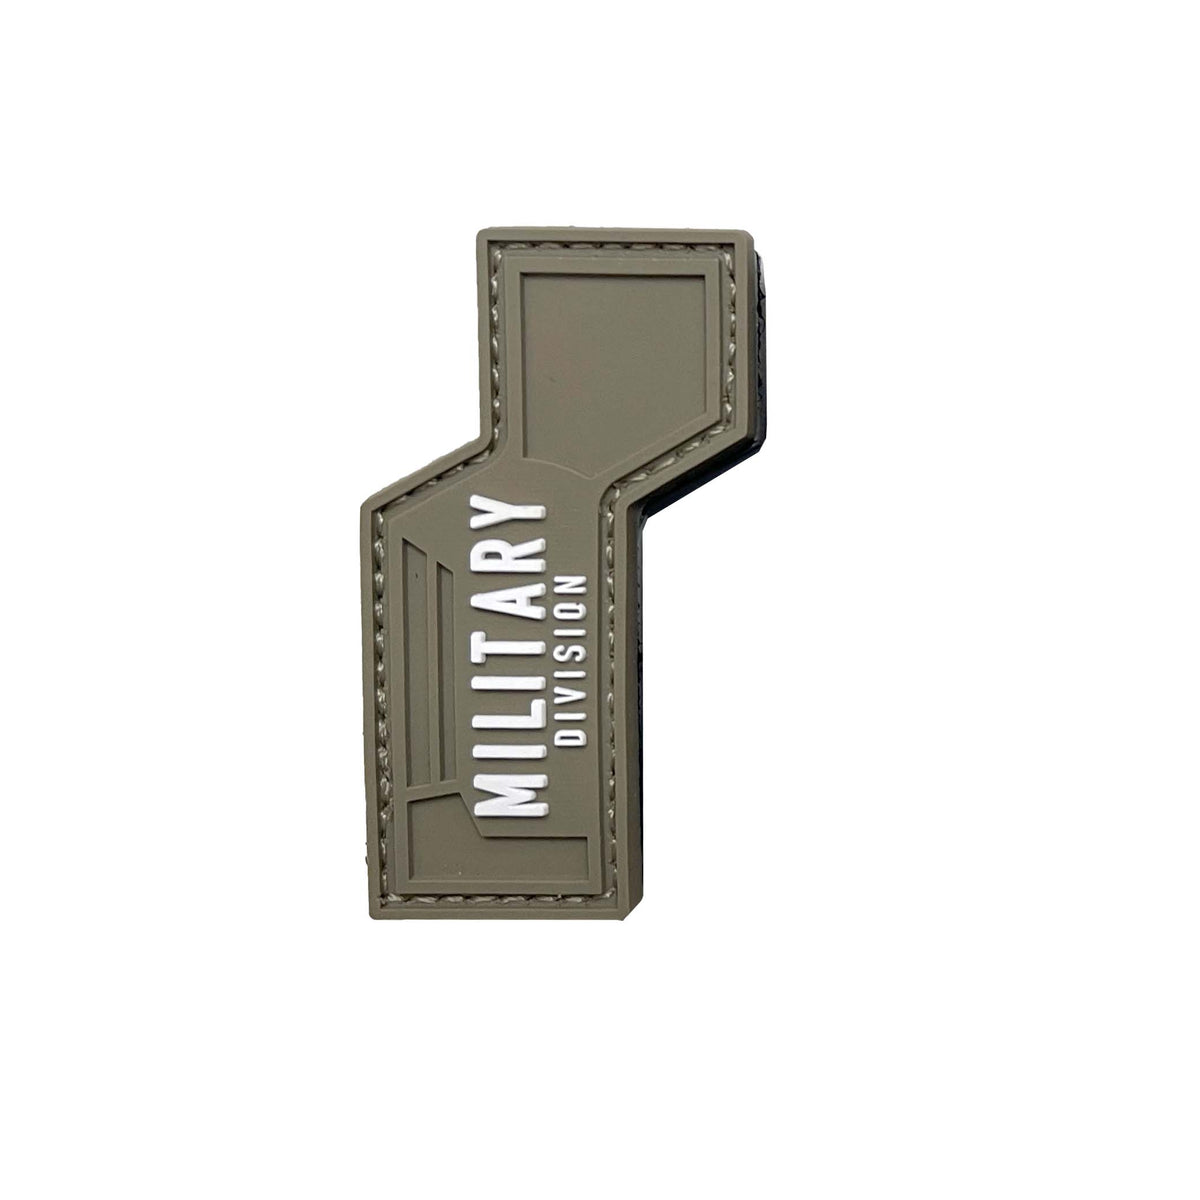 T&E Testing Team Patch Military (8011509858556)